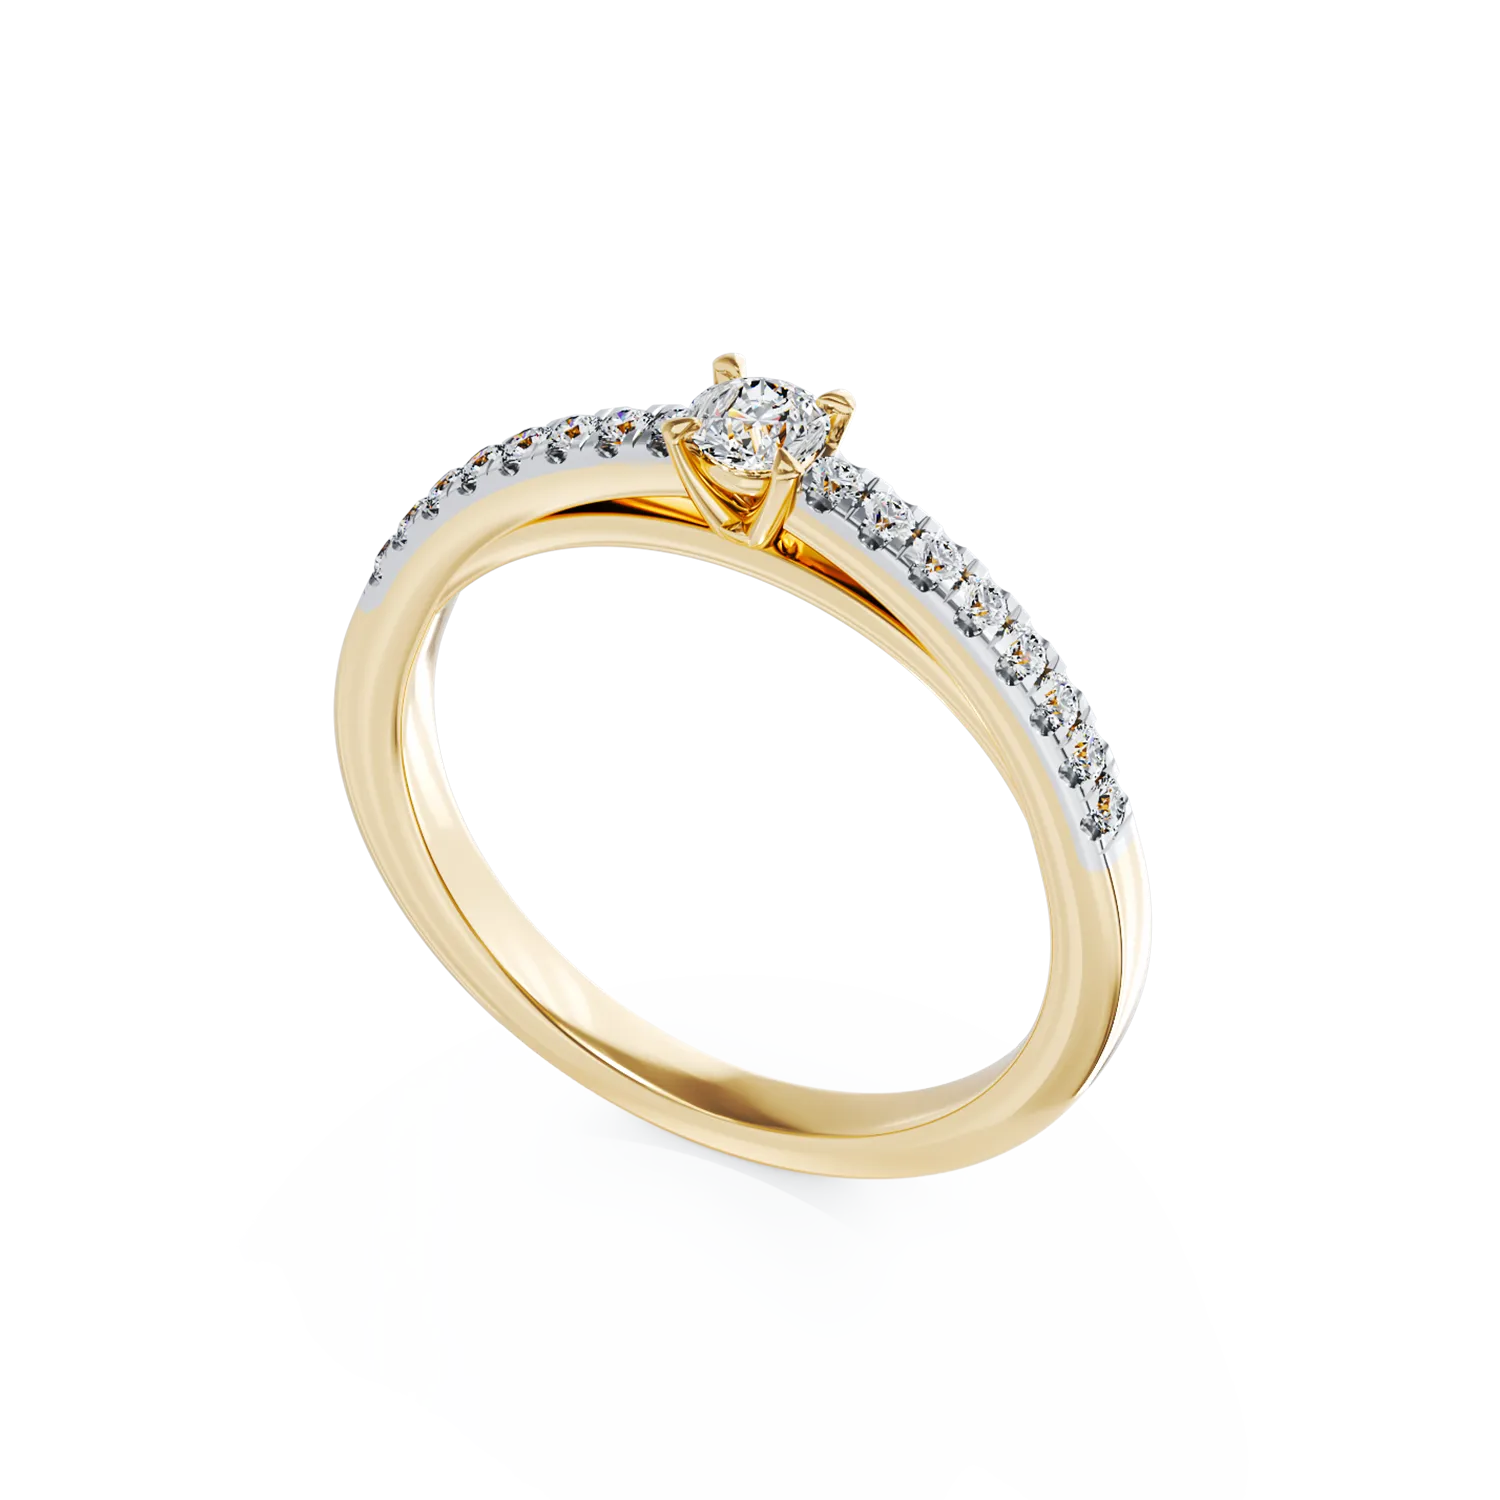 18K yellow gold engagement ring with 0.112ct diamond and 0.148ct diamond